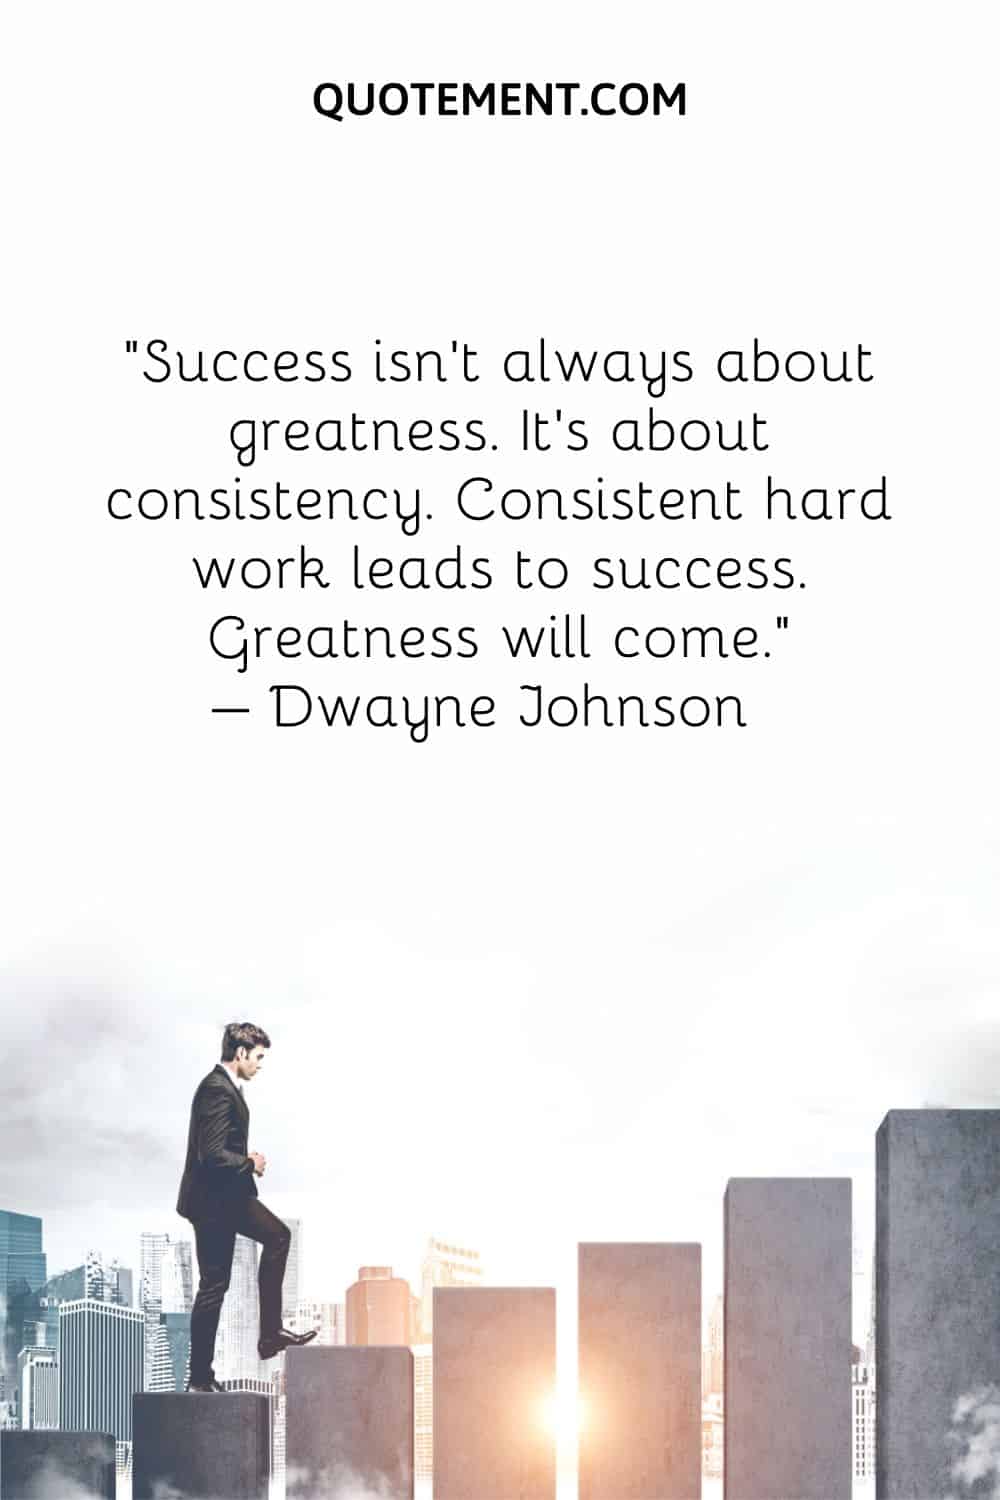 Success isn't always about greatness. It's about consistency